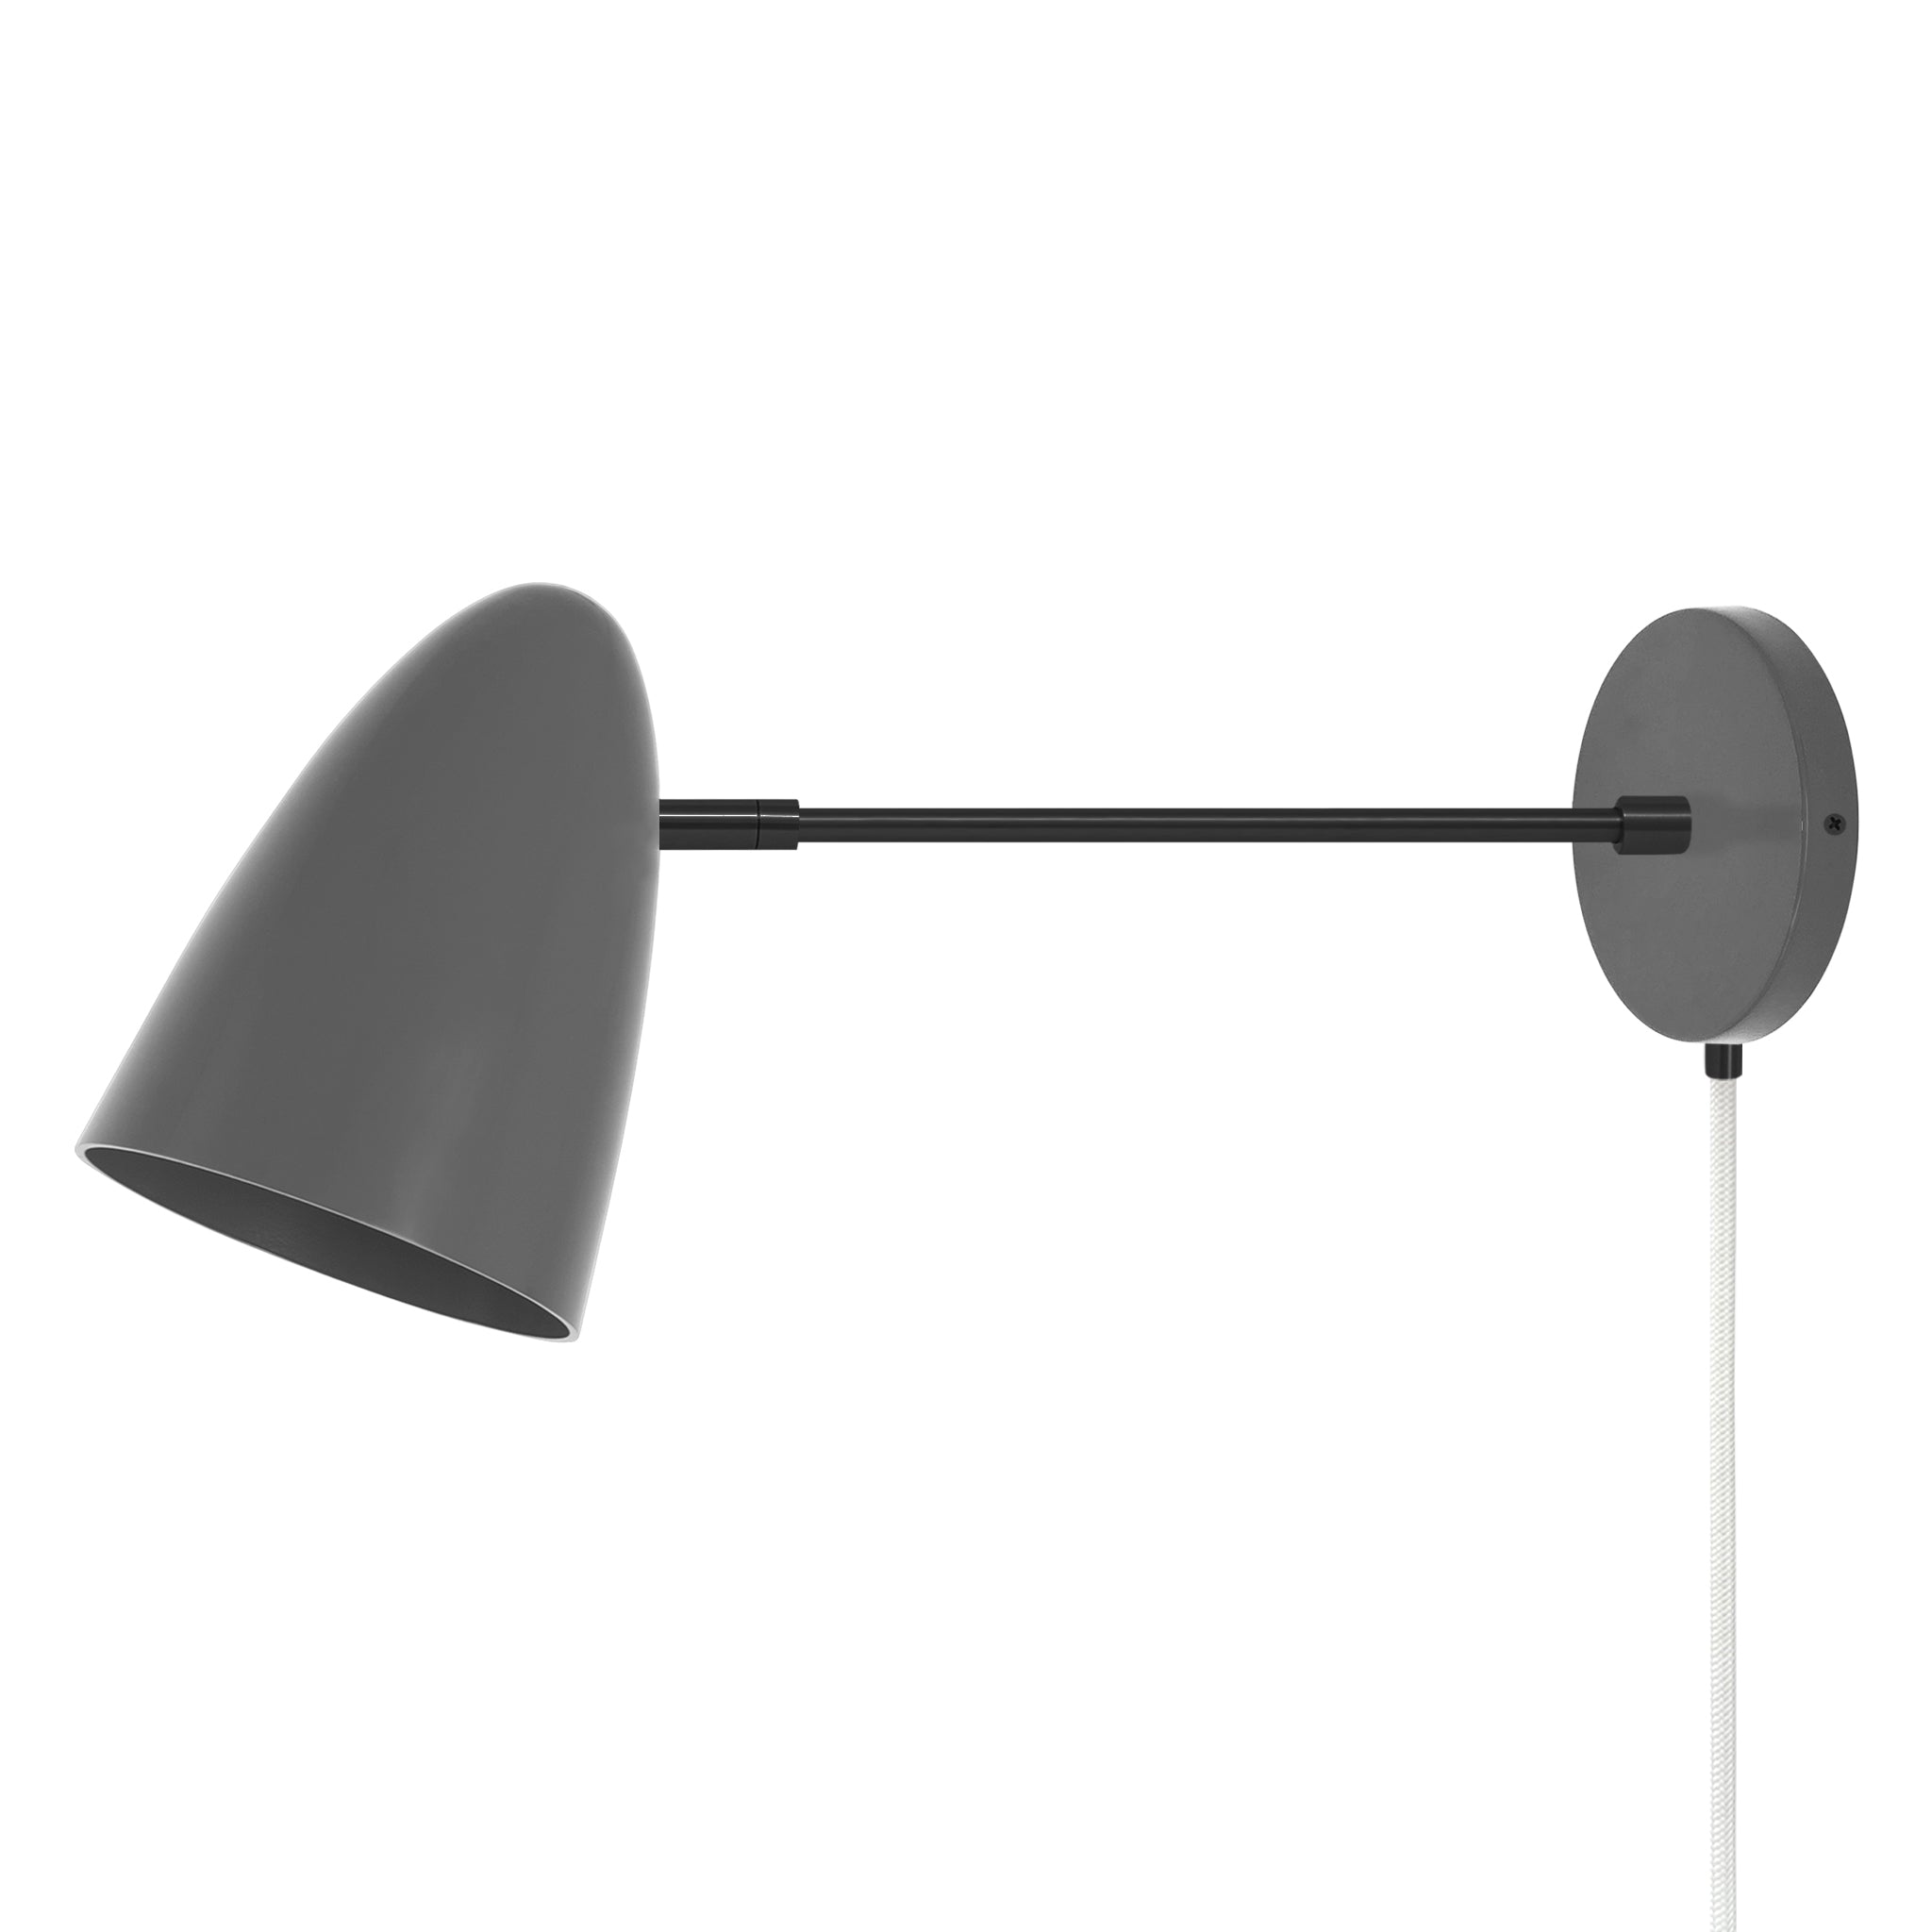 Black and charcoal color Boom plug-in sconce 10" arm Dutton Brown lighting